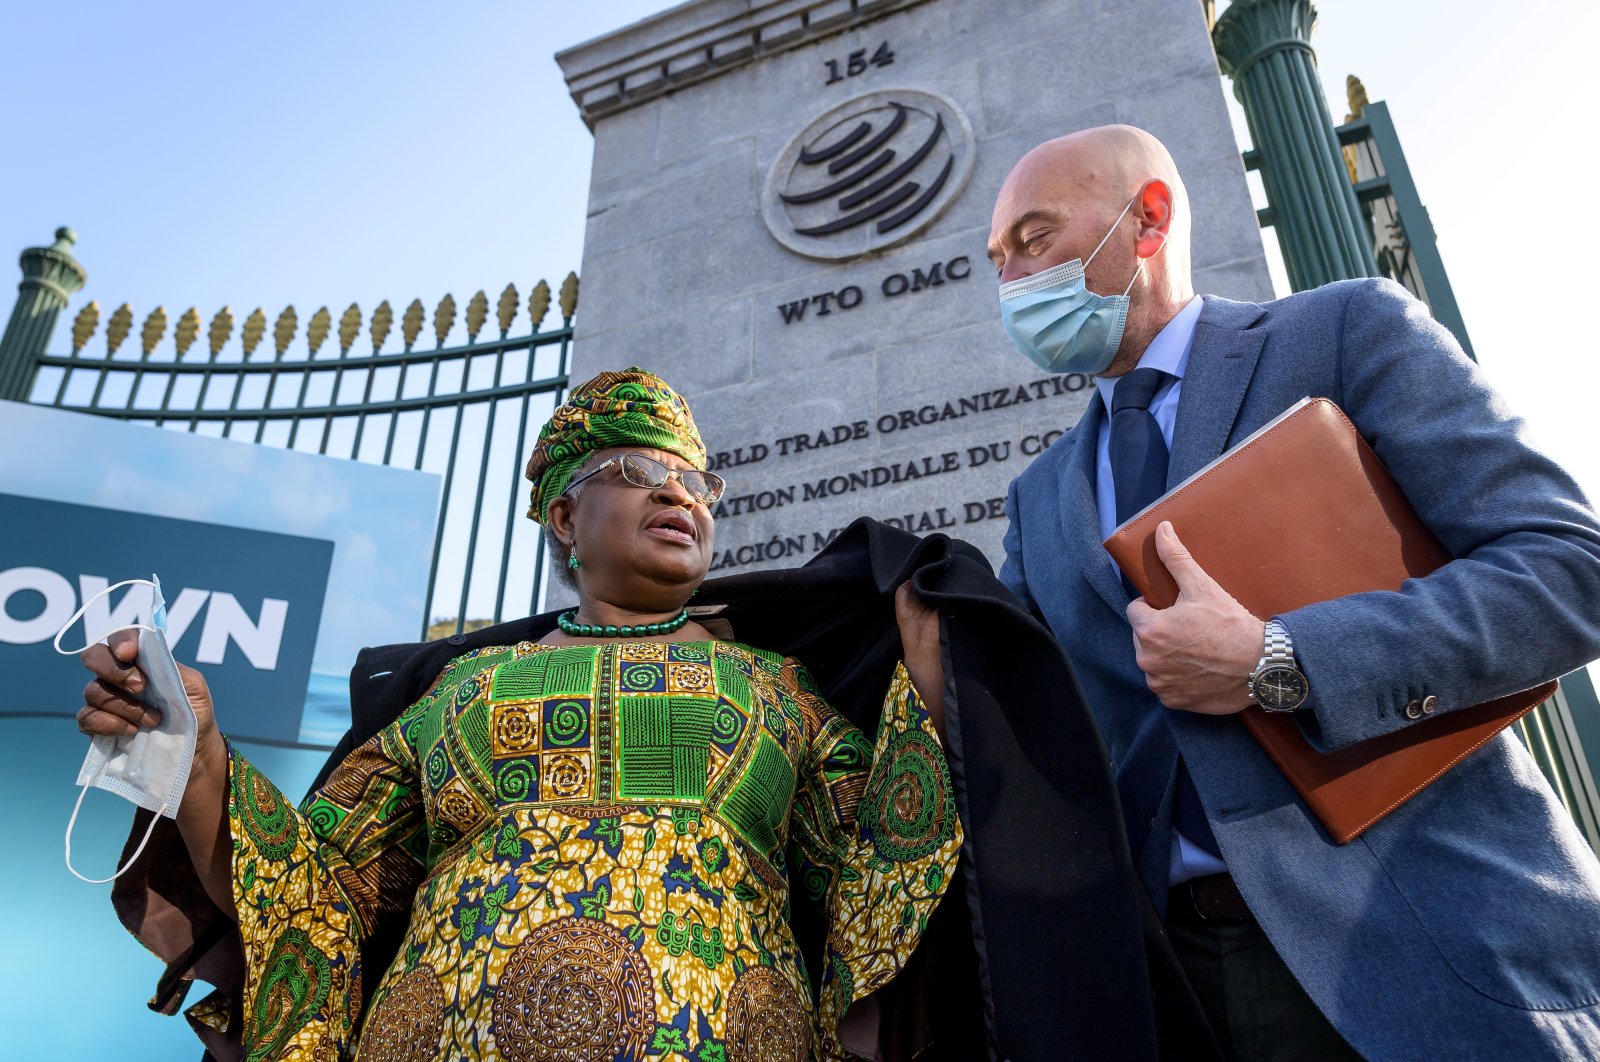 New Director-General of the World Trade Organisation Ngozi Okonjo-Iweala (L) walks at the entrance of the WTO following a photo-op upon her arrival at the WTO headquarters to take office in Geneva, Switzerland, March 1, 2021. (Reuters Photo)